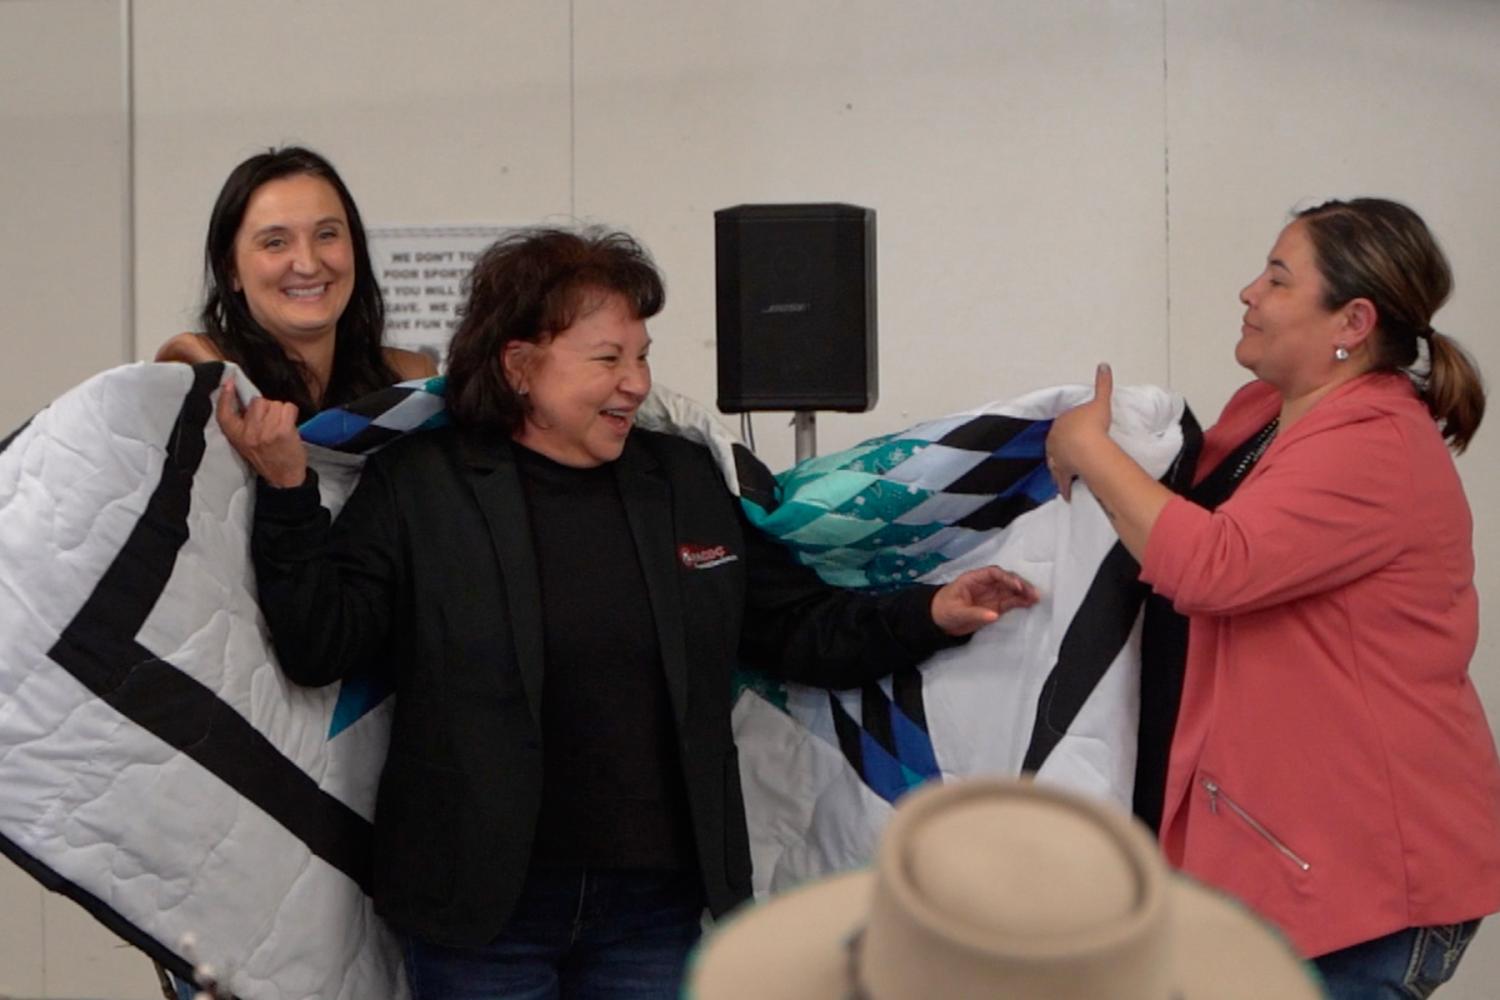 Lakota Vogel, Four Bands Community Fund and Kerry Shabi, Montana Native Growth Fund present Angie Main, Executive Director of NACDC Financial Services, a star quilt in honor of her work in planning the Mountain | Plains Indigenous Finance Gathering at Blackfeet Nation, Montana.